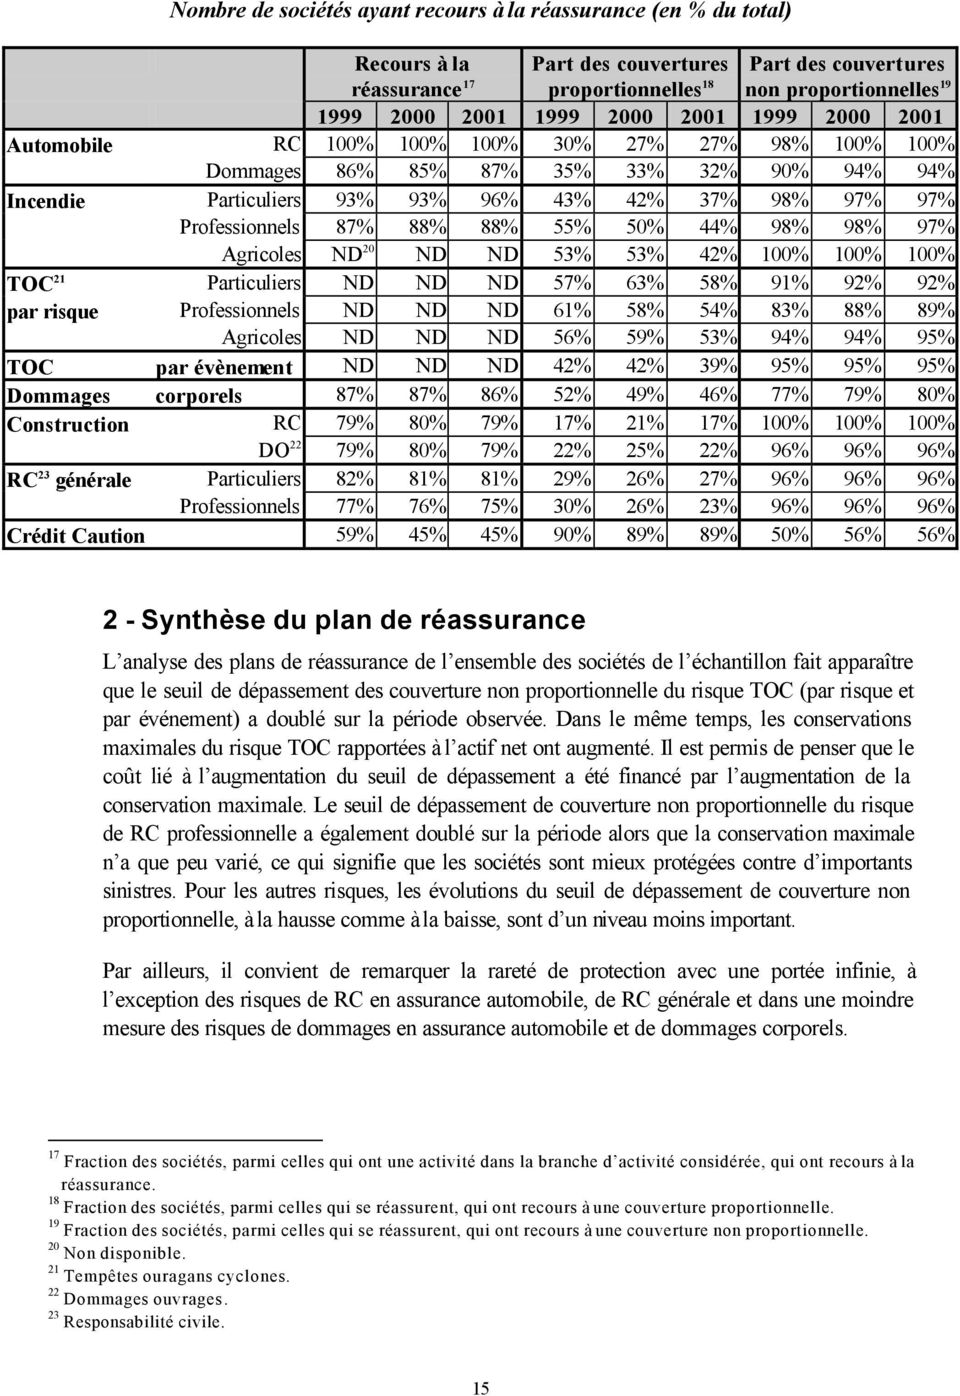 ND 20 ND ND 53% 53% 42% 100% 100% 100% TOC 21 Particuliers ND ND ND 57% 63% 58% 91% 92% 92% par risque Professionnels ND ND ND 61% 58% 54% 83% 88% 89% Agricoles ND ND ND 56% 59% 53% 94% 94% 95% TOC